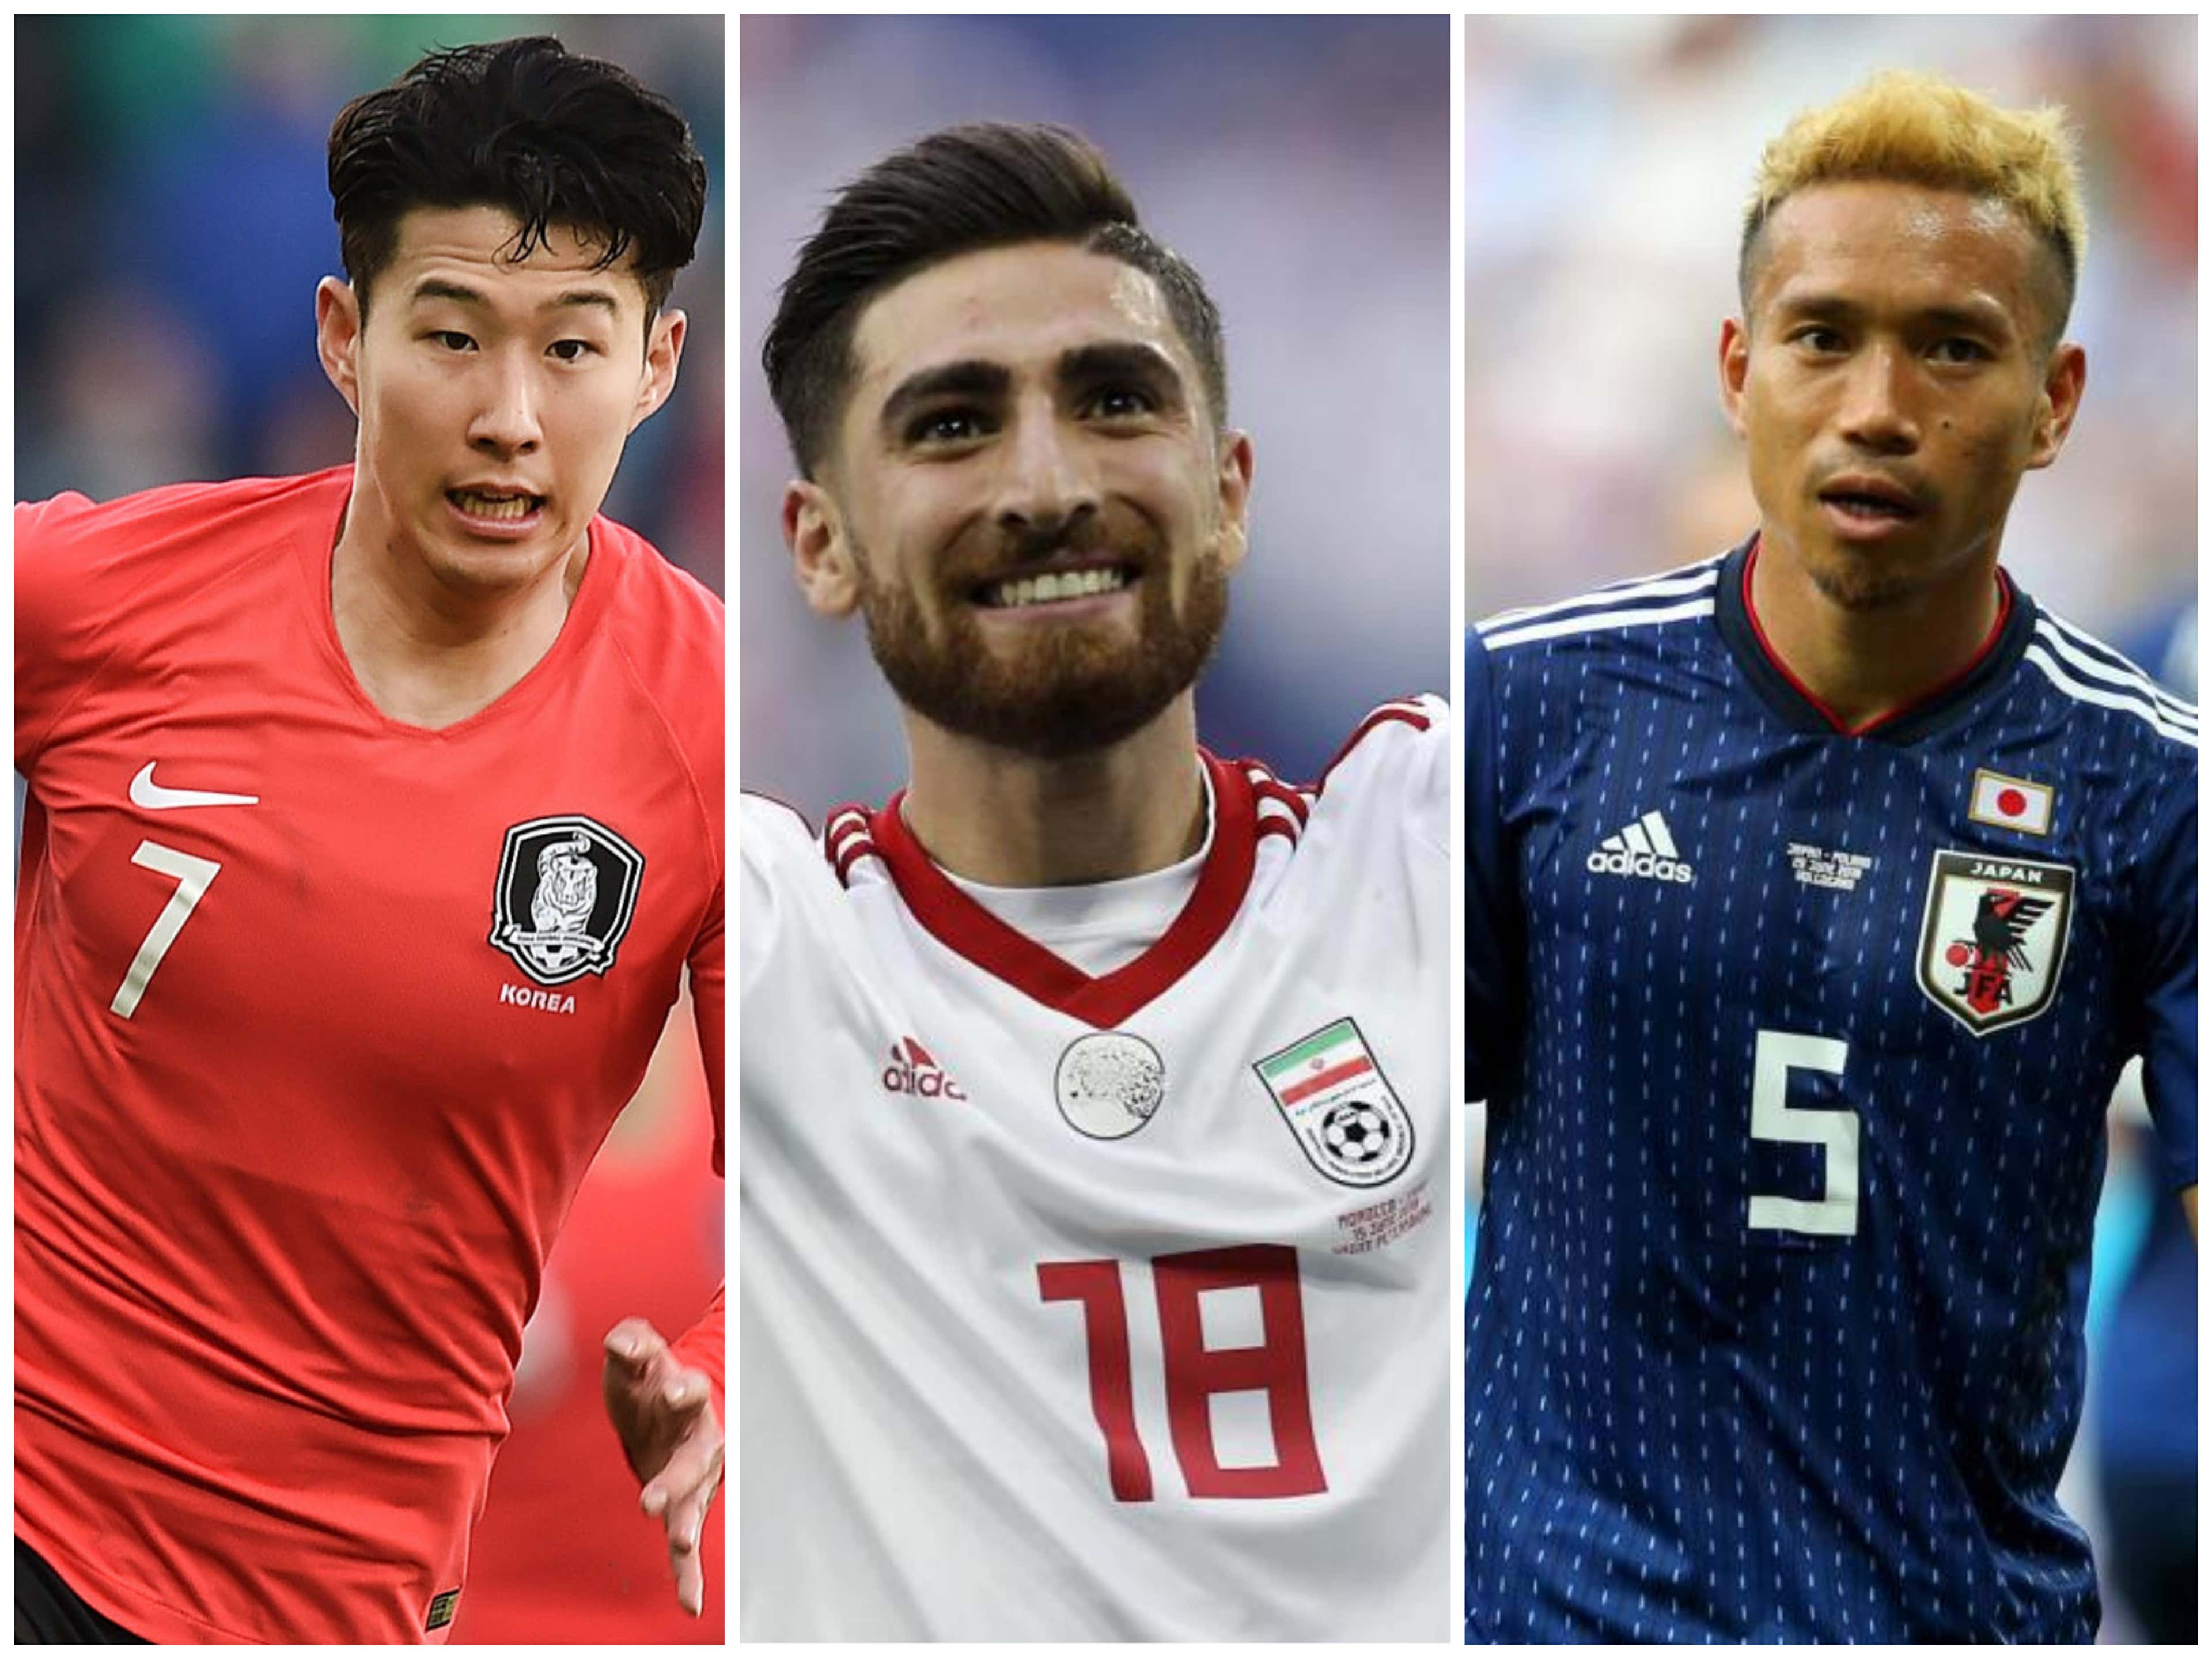 Every Afc Asian Cup 2019 Squad Revealed - Final 23-Man Lists | Goal.Com